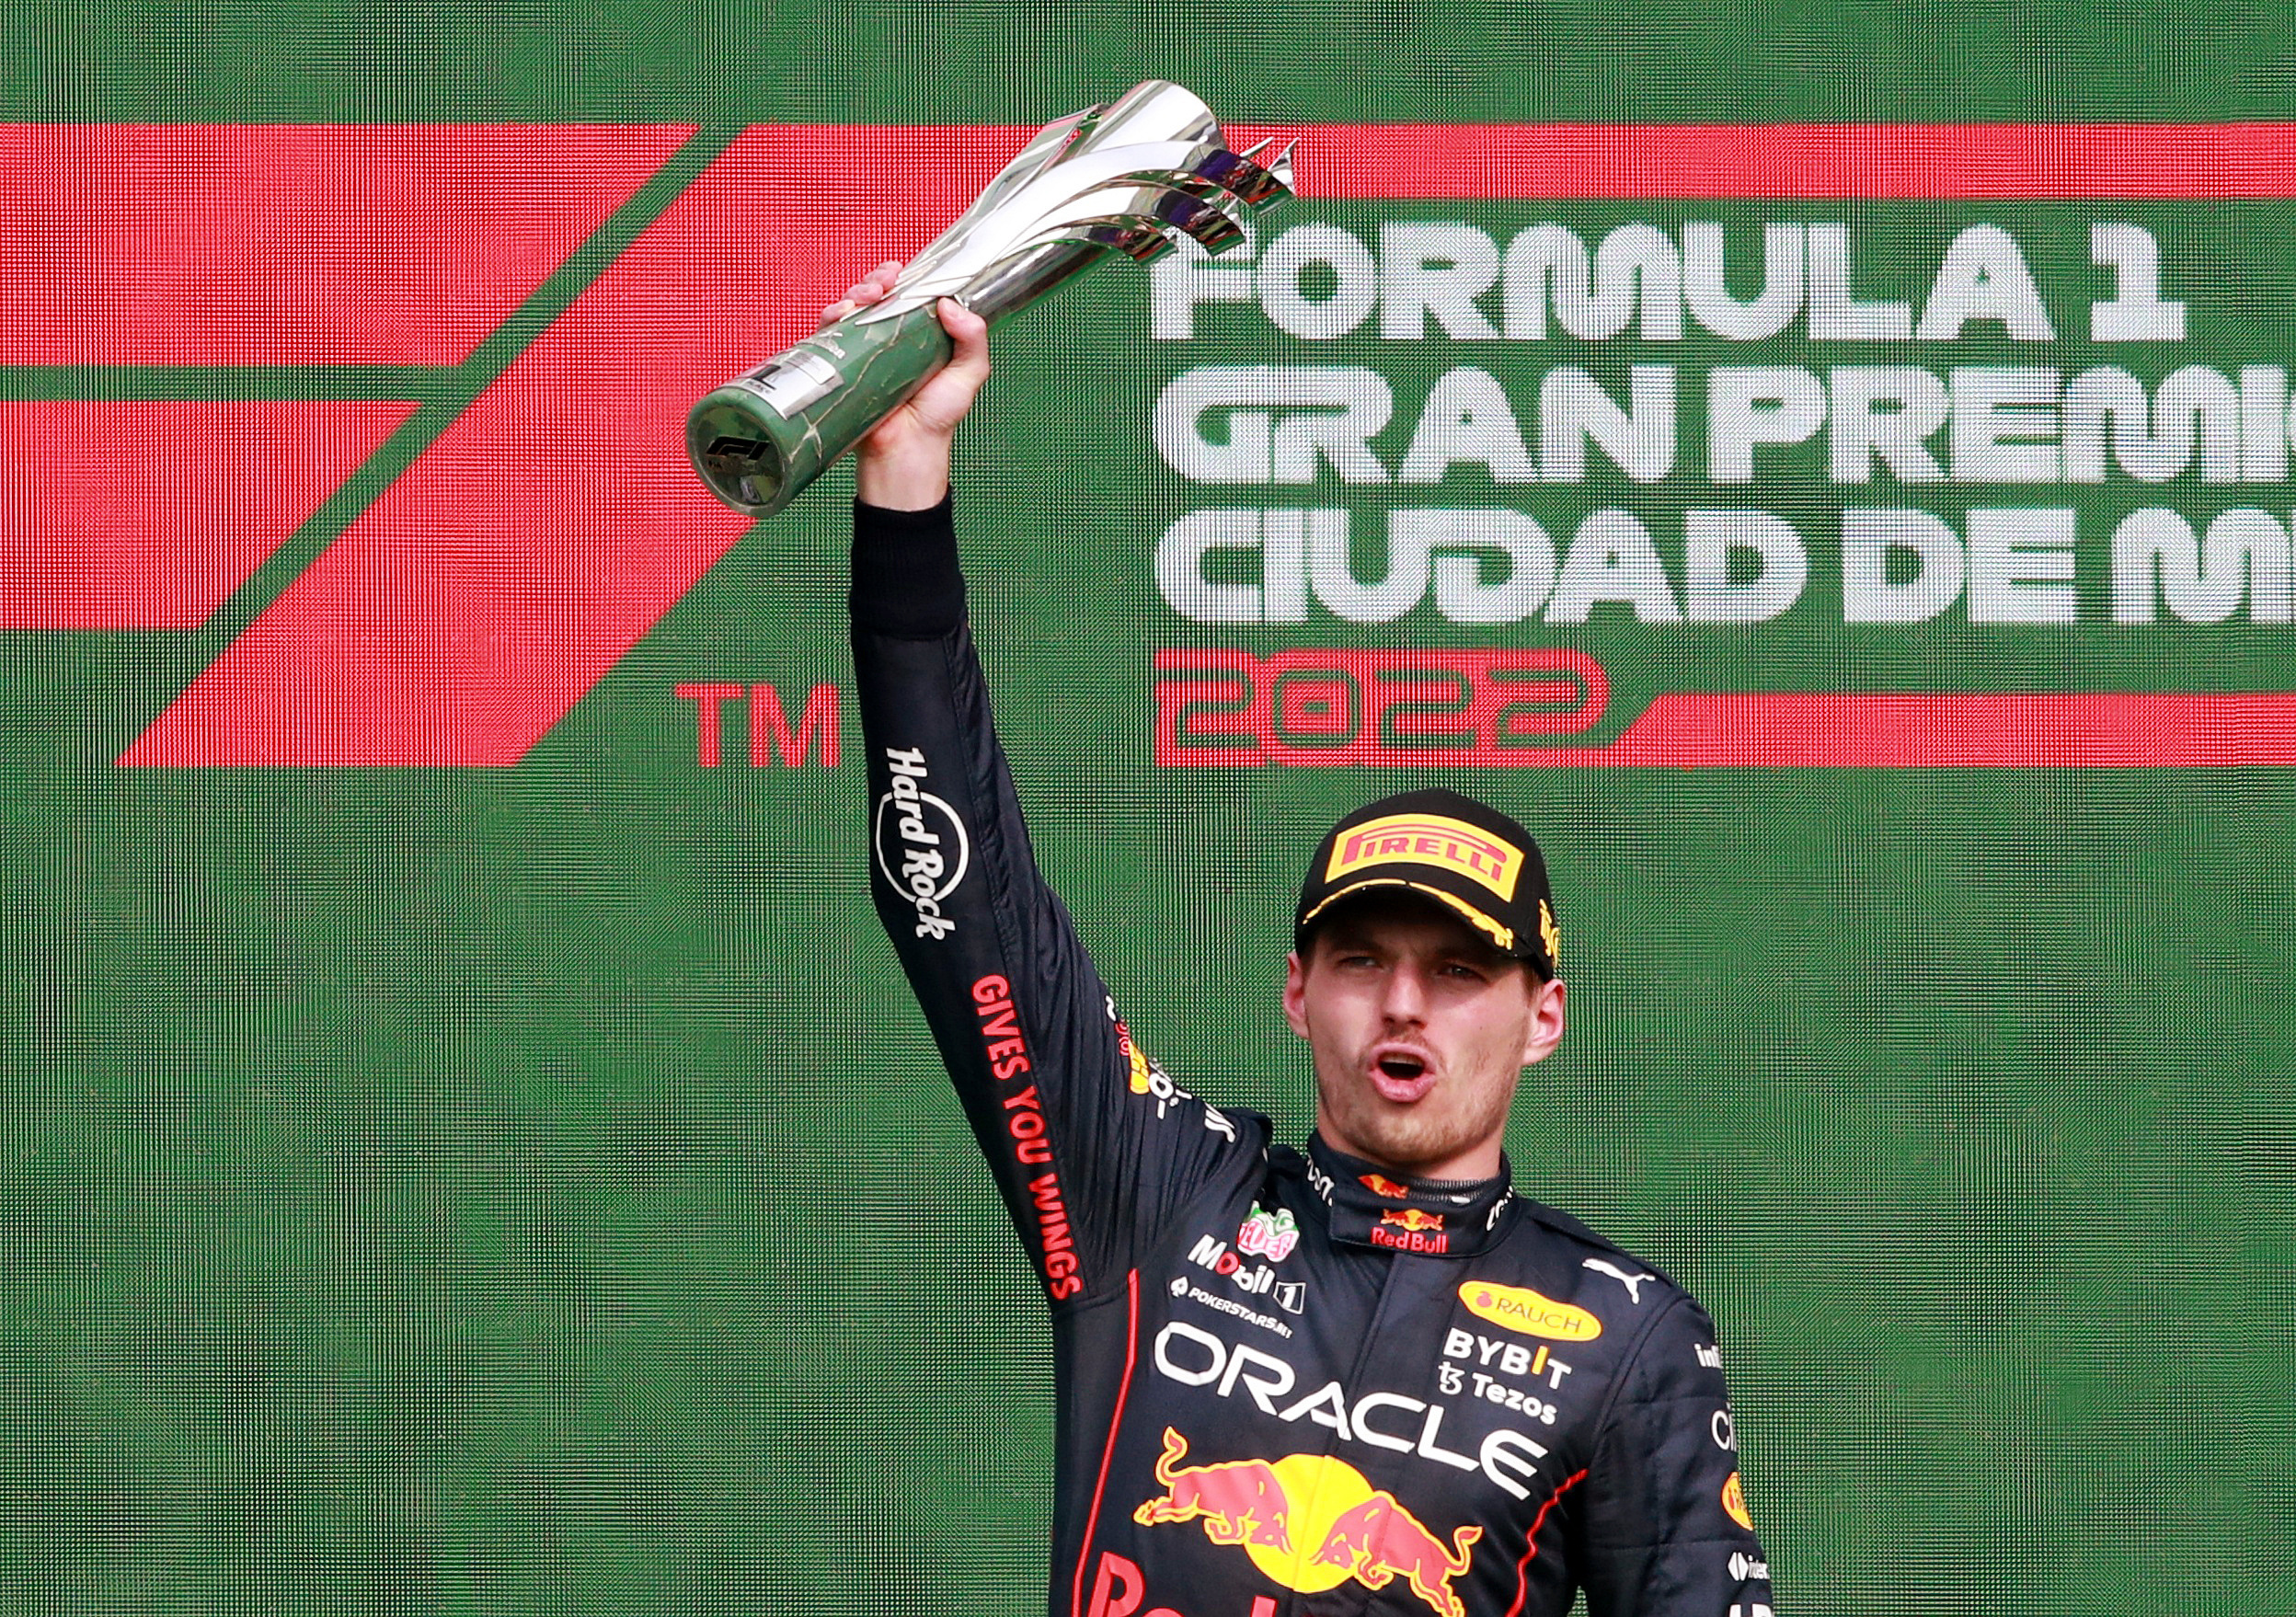 Formula 1 records: Most wins, pole positions and world championships